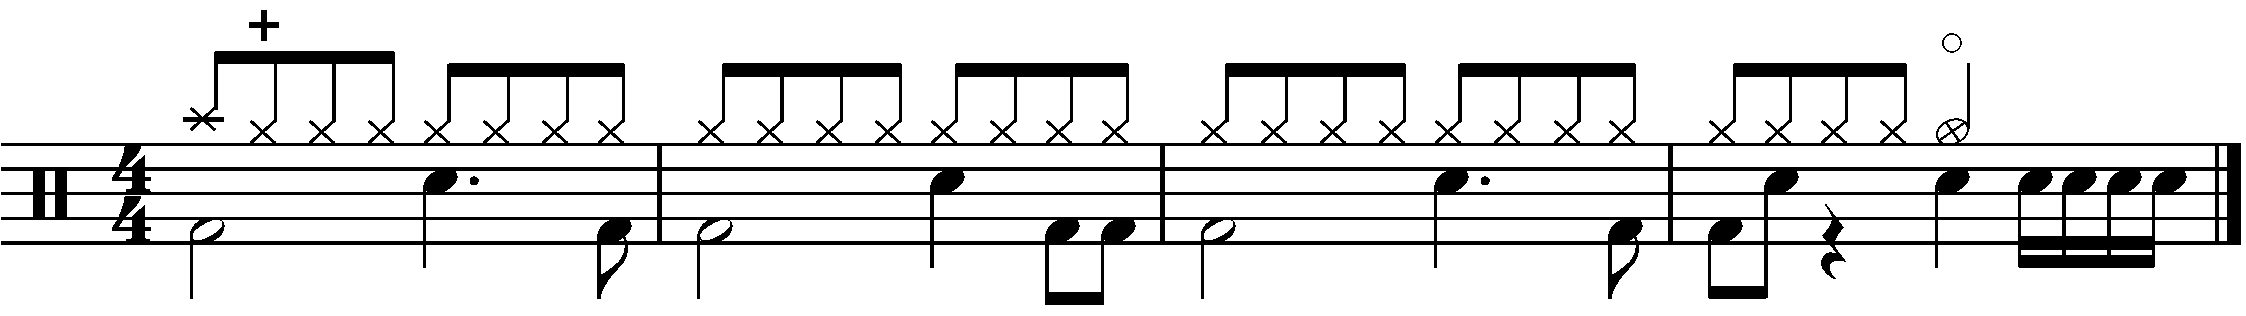 A four bar phrase made up of A B and C sections in half time